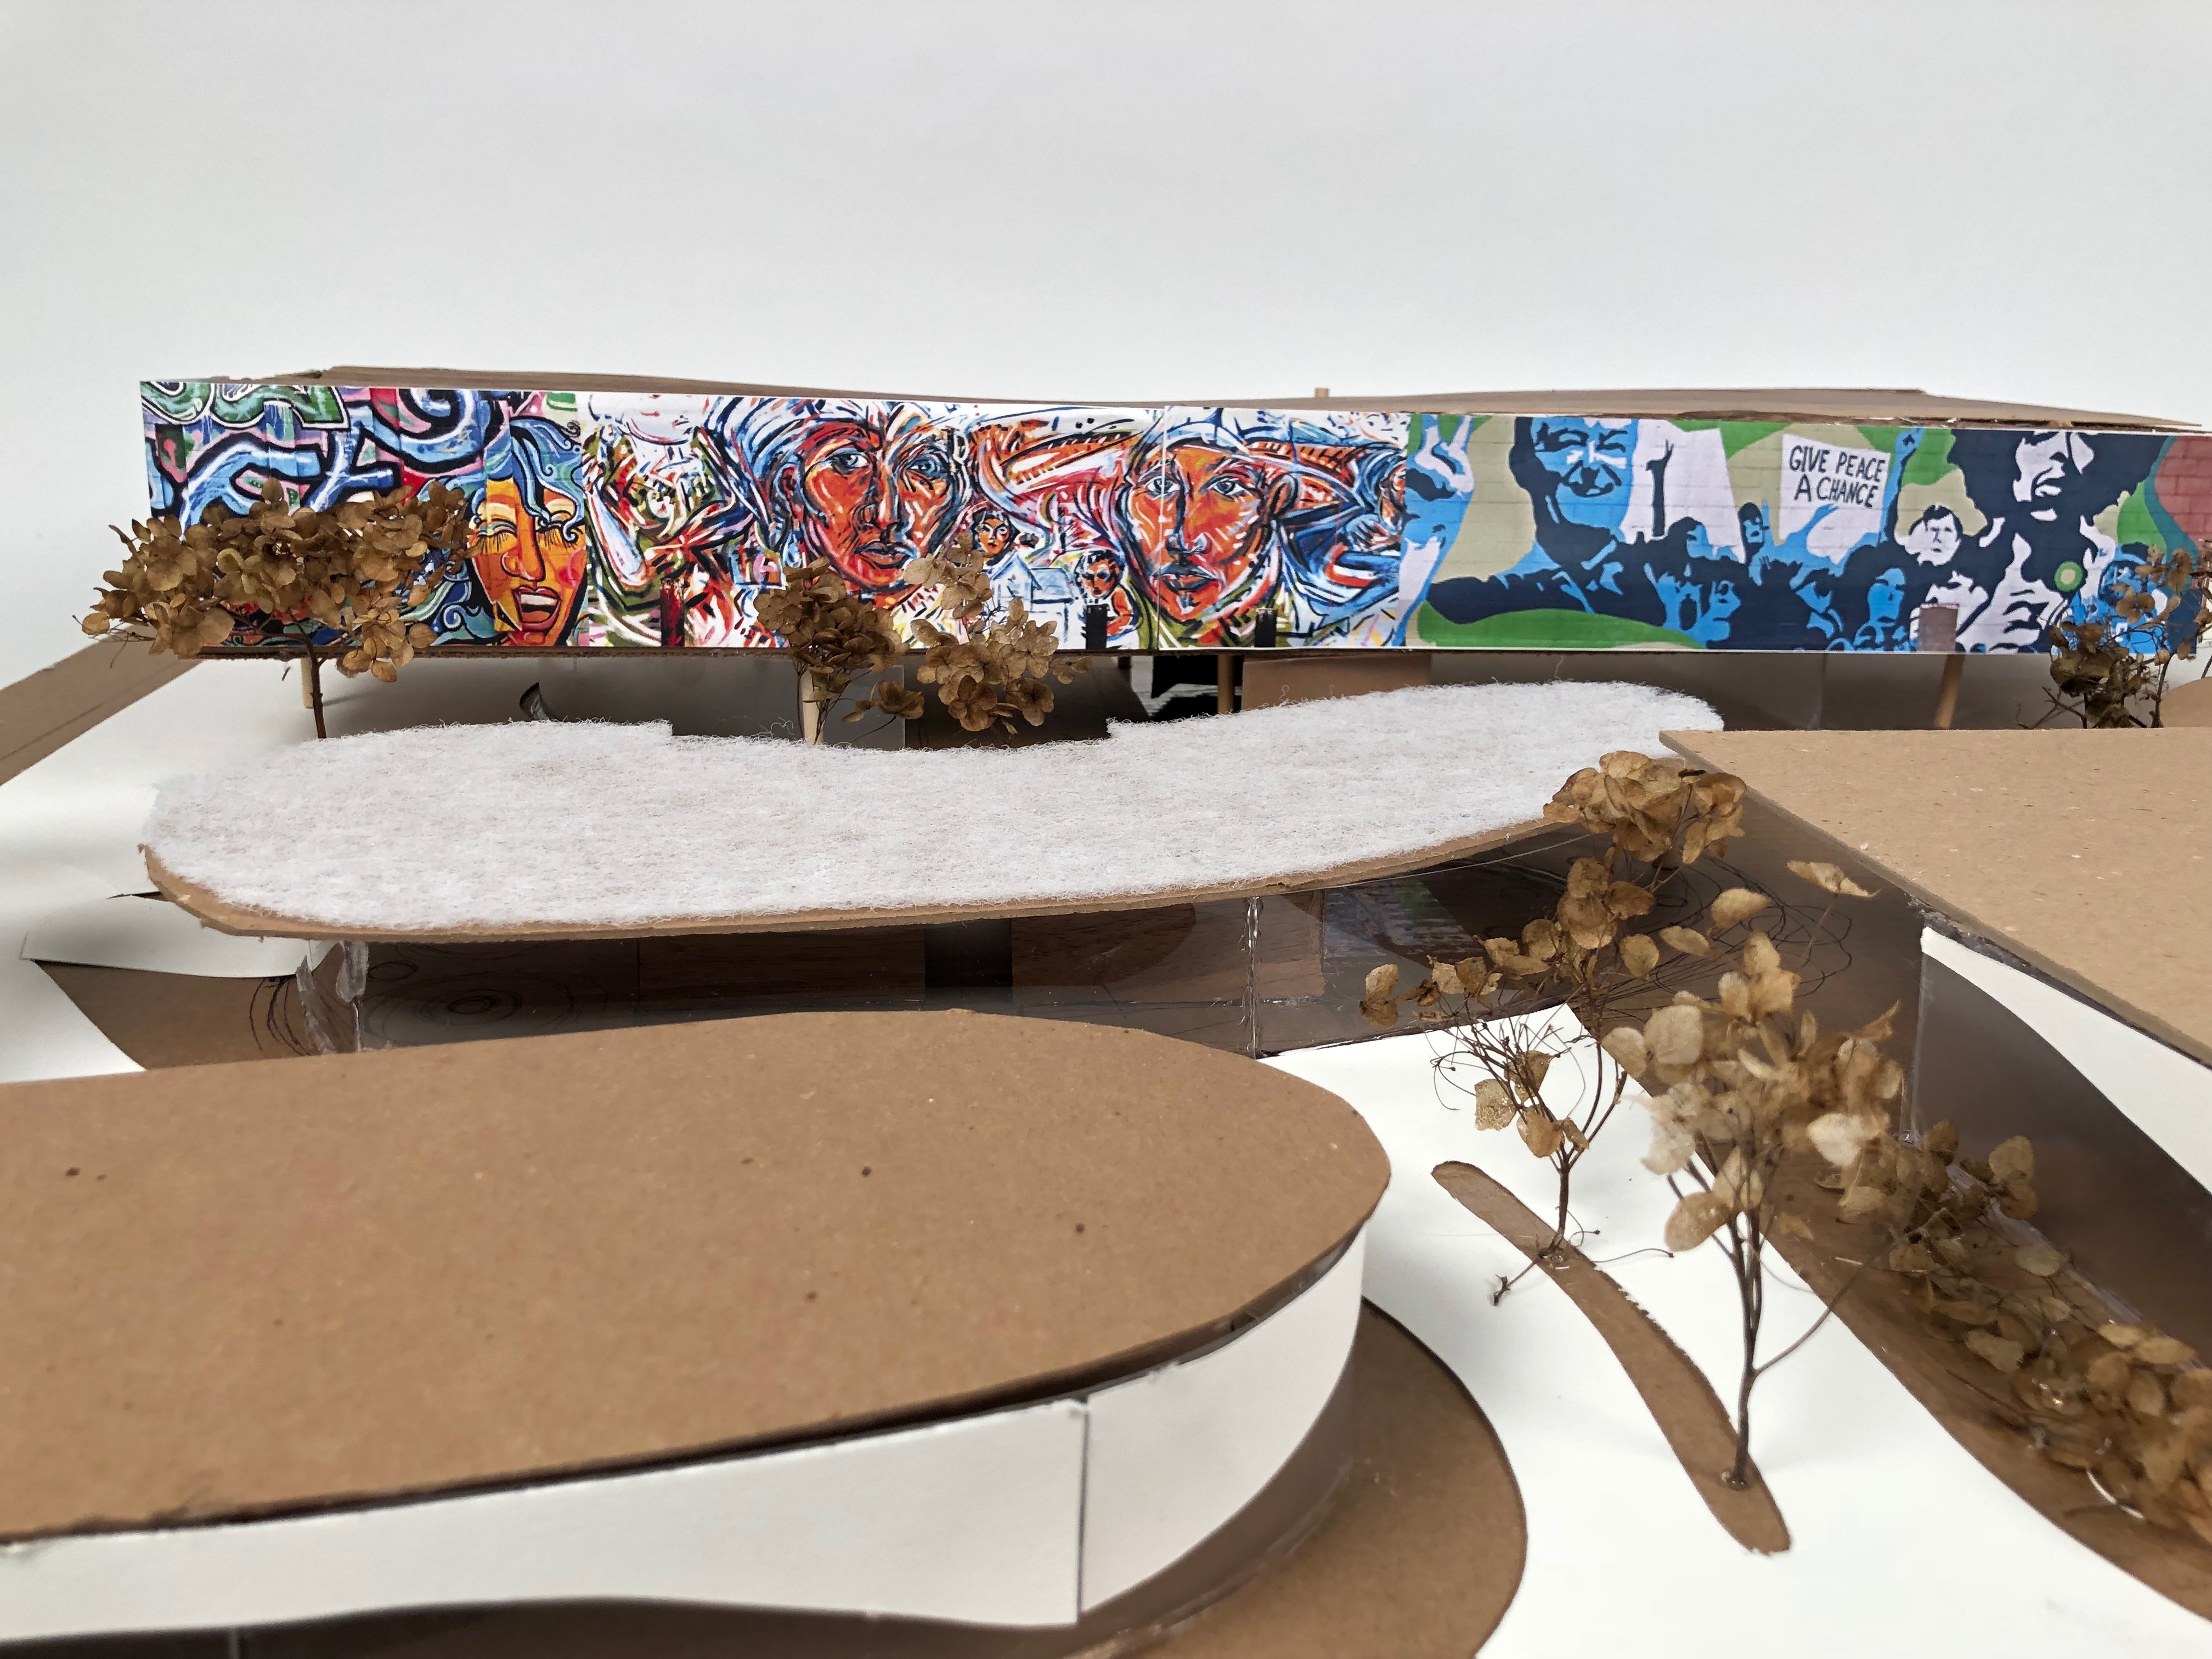 Architectural model from a class in 2019 with mural